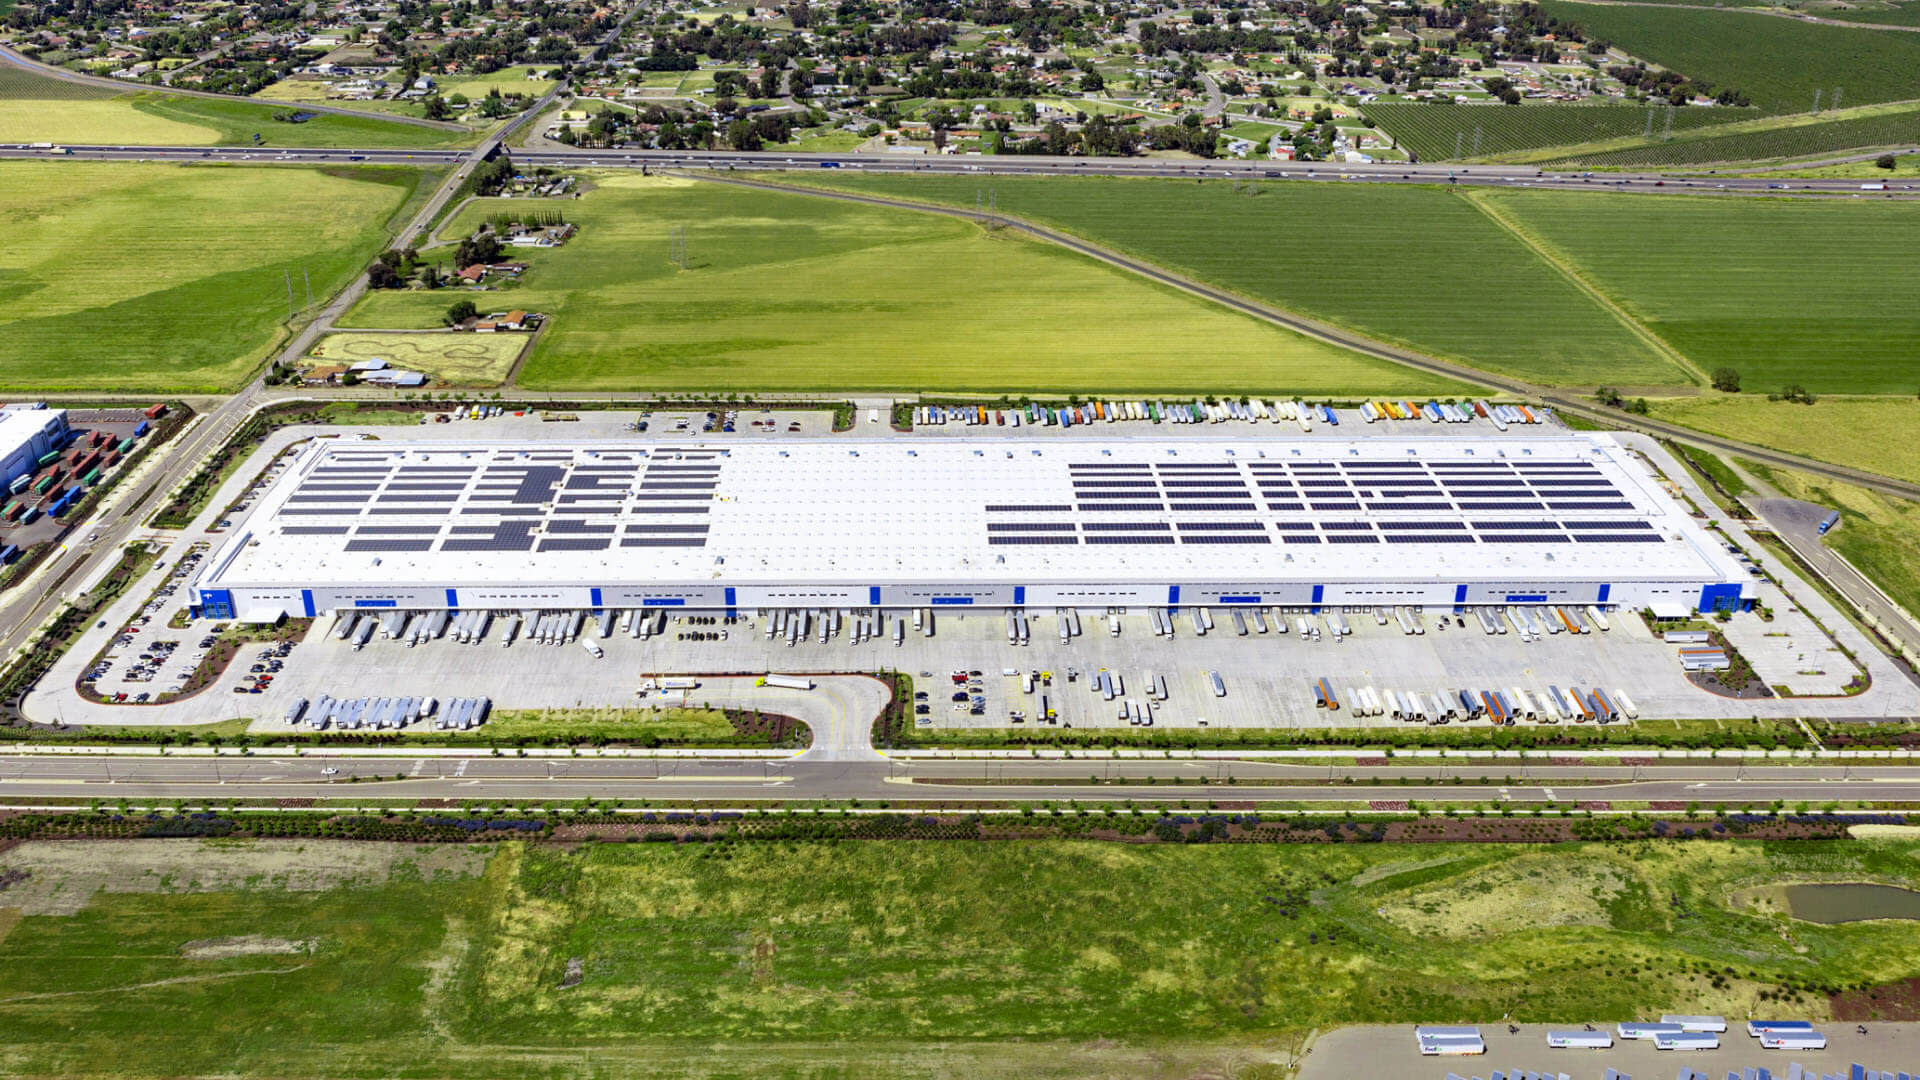 A warehouse with solar panels on its roof